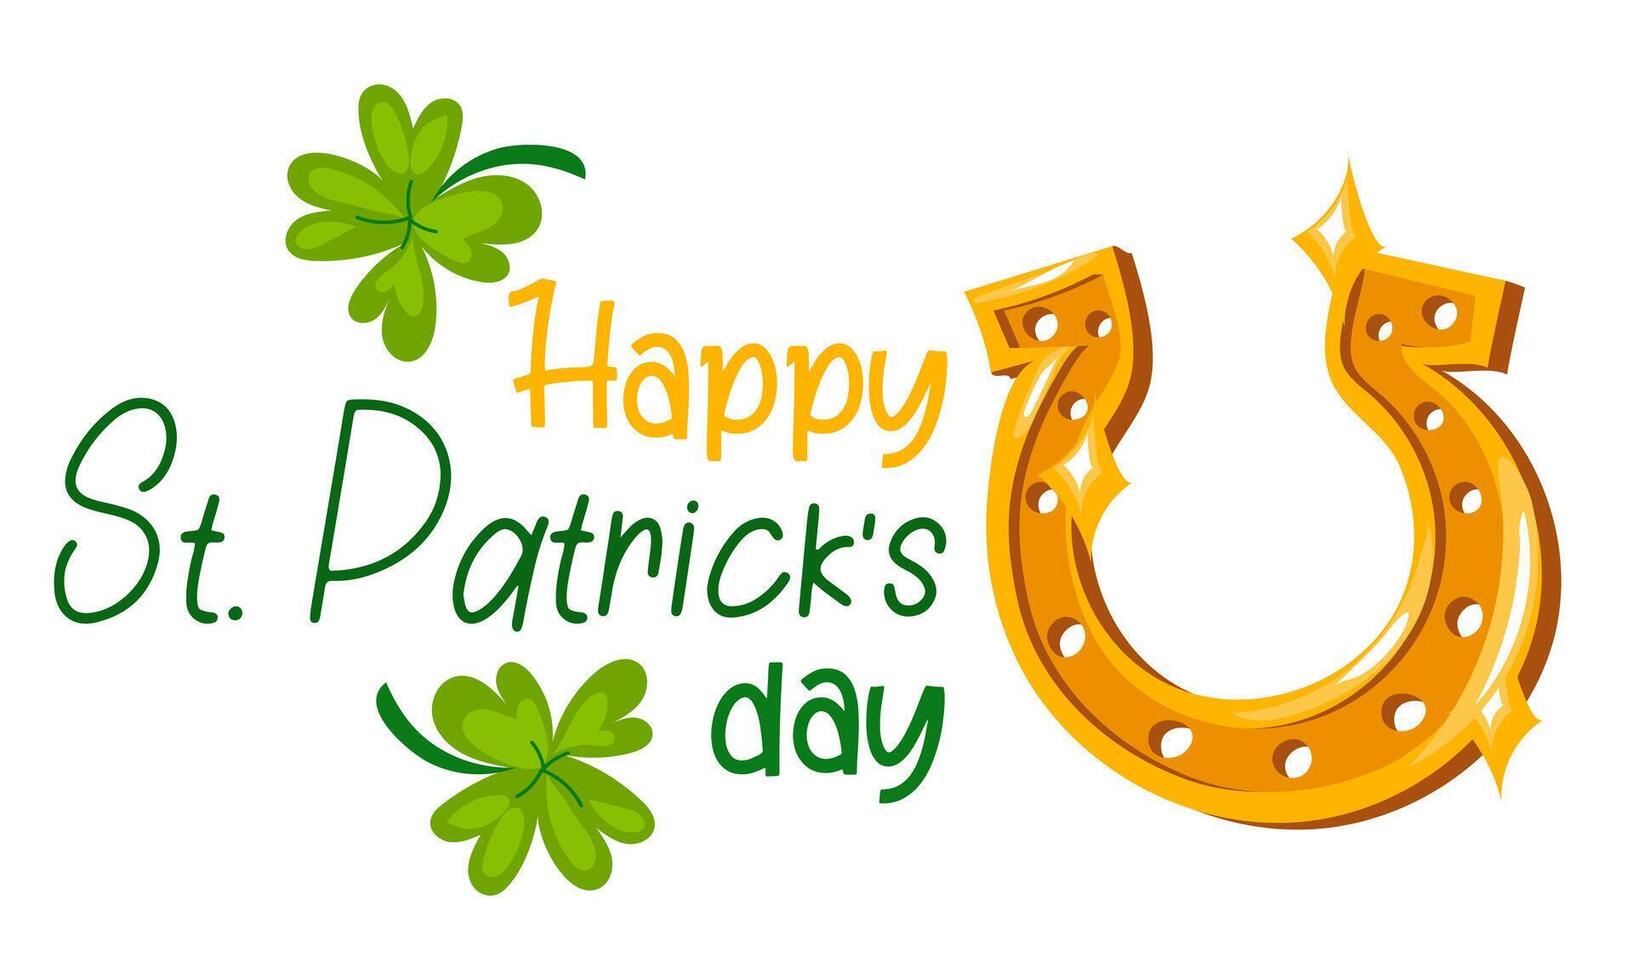 Funny inscriptions happy St. Patrick's Day and a golden horseshoe for good luck for posters, flyers, postcards, invitations, stickers, banners, gifts. Vector illustration modern Irishman. Rectangle